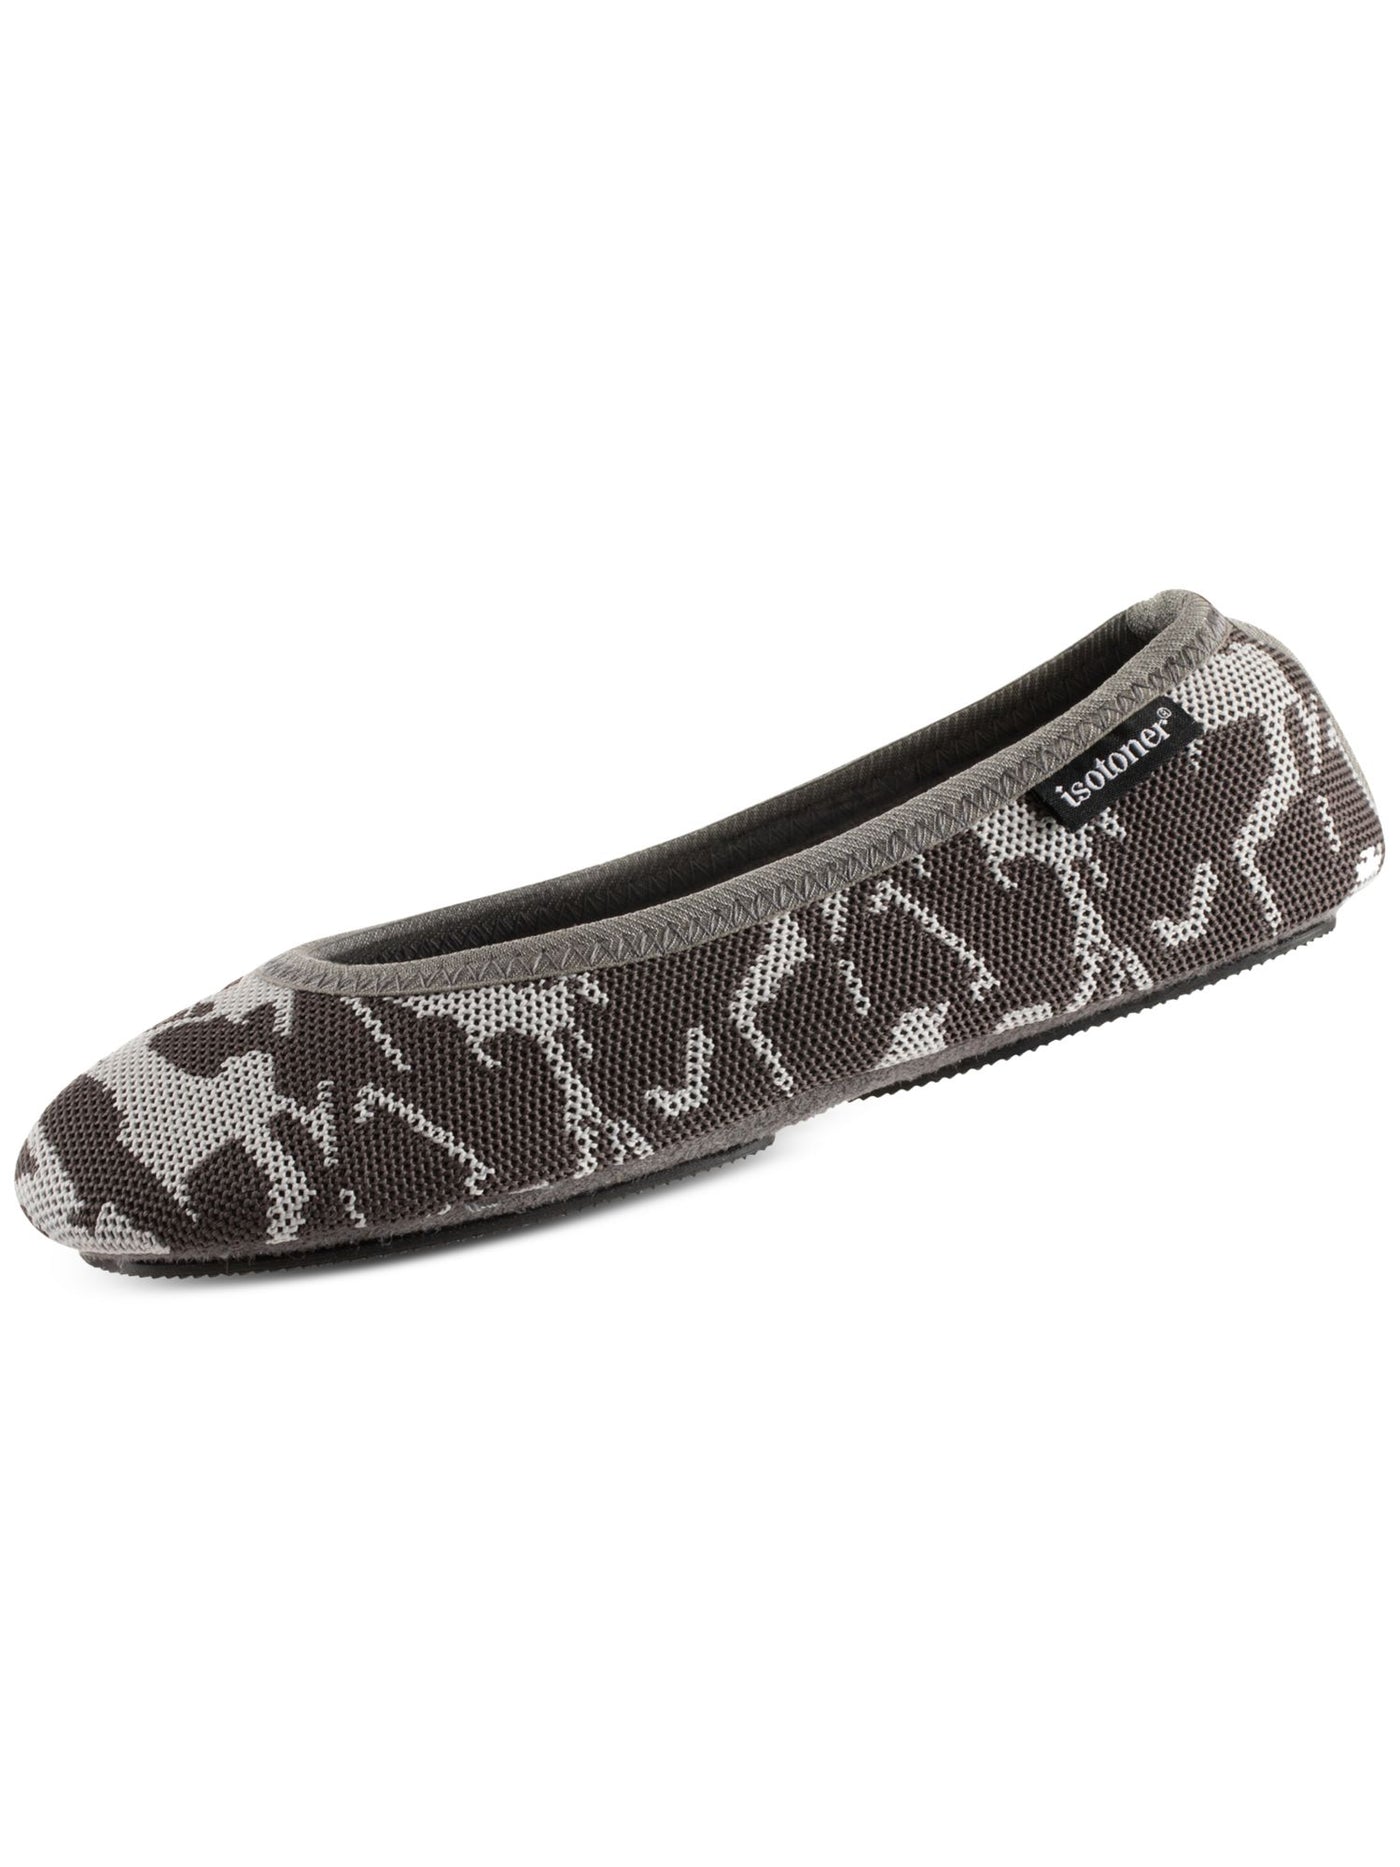 ISOTONER Womens Gray Camouflage Foldable Ballet-Style Casual L